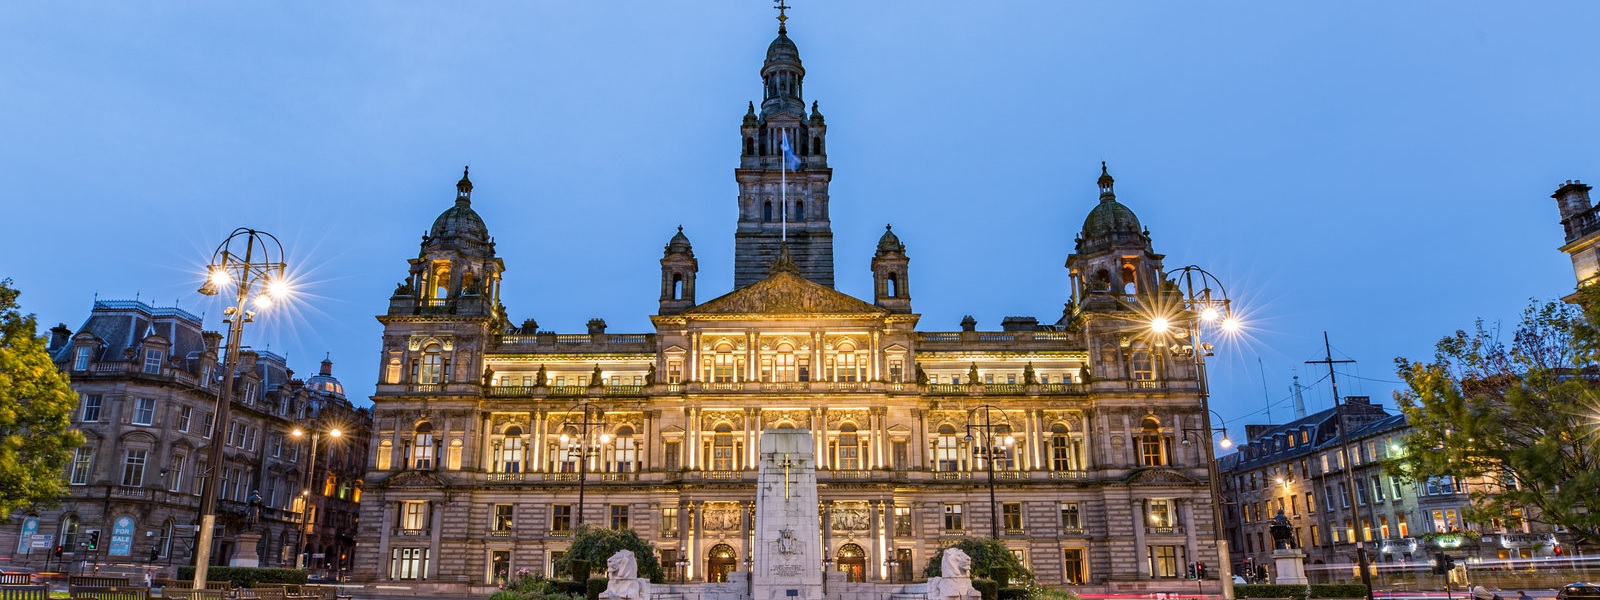 Glasgow City Chambers and George Square at Night